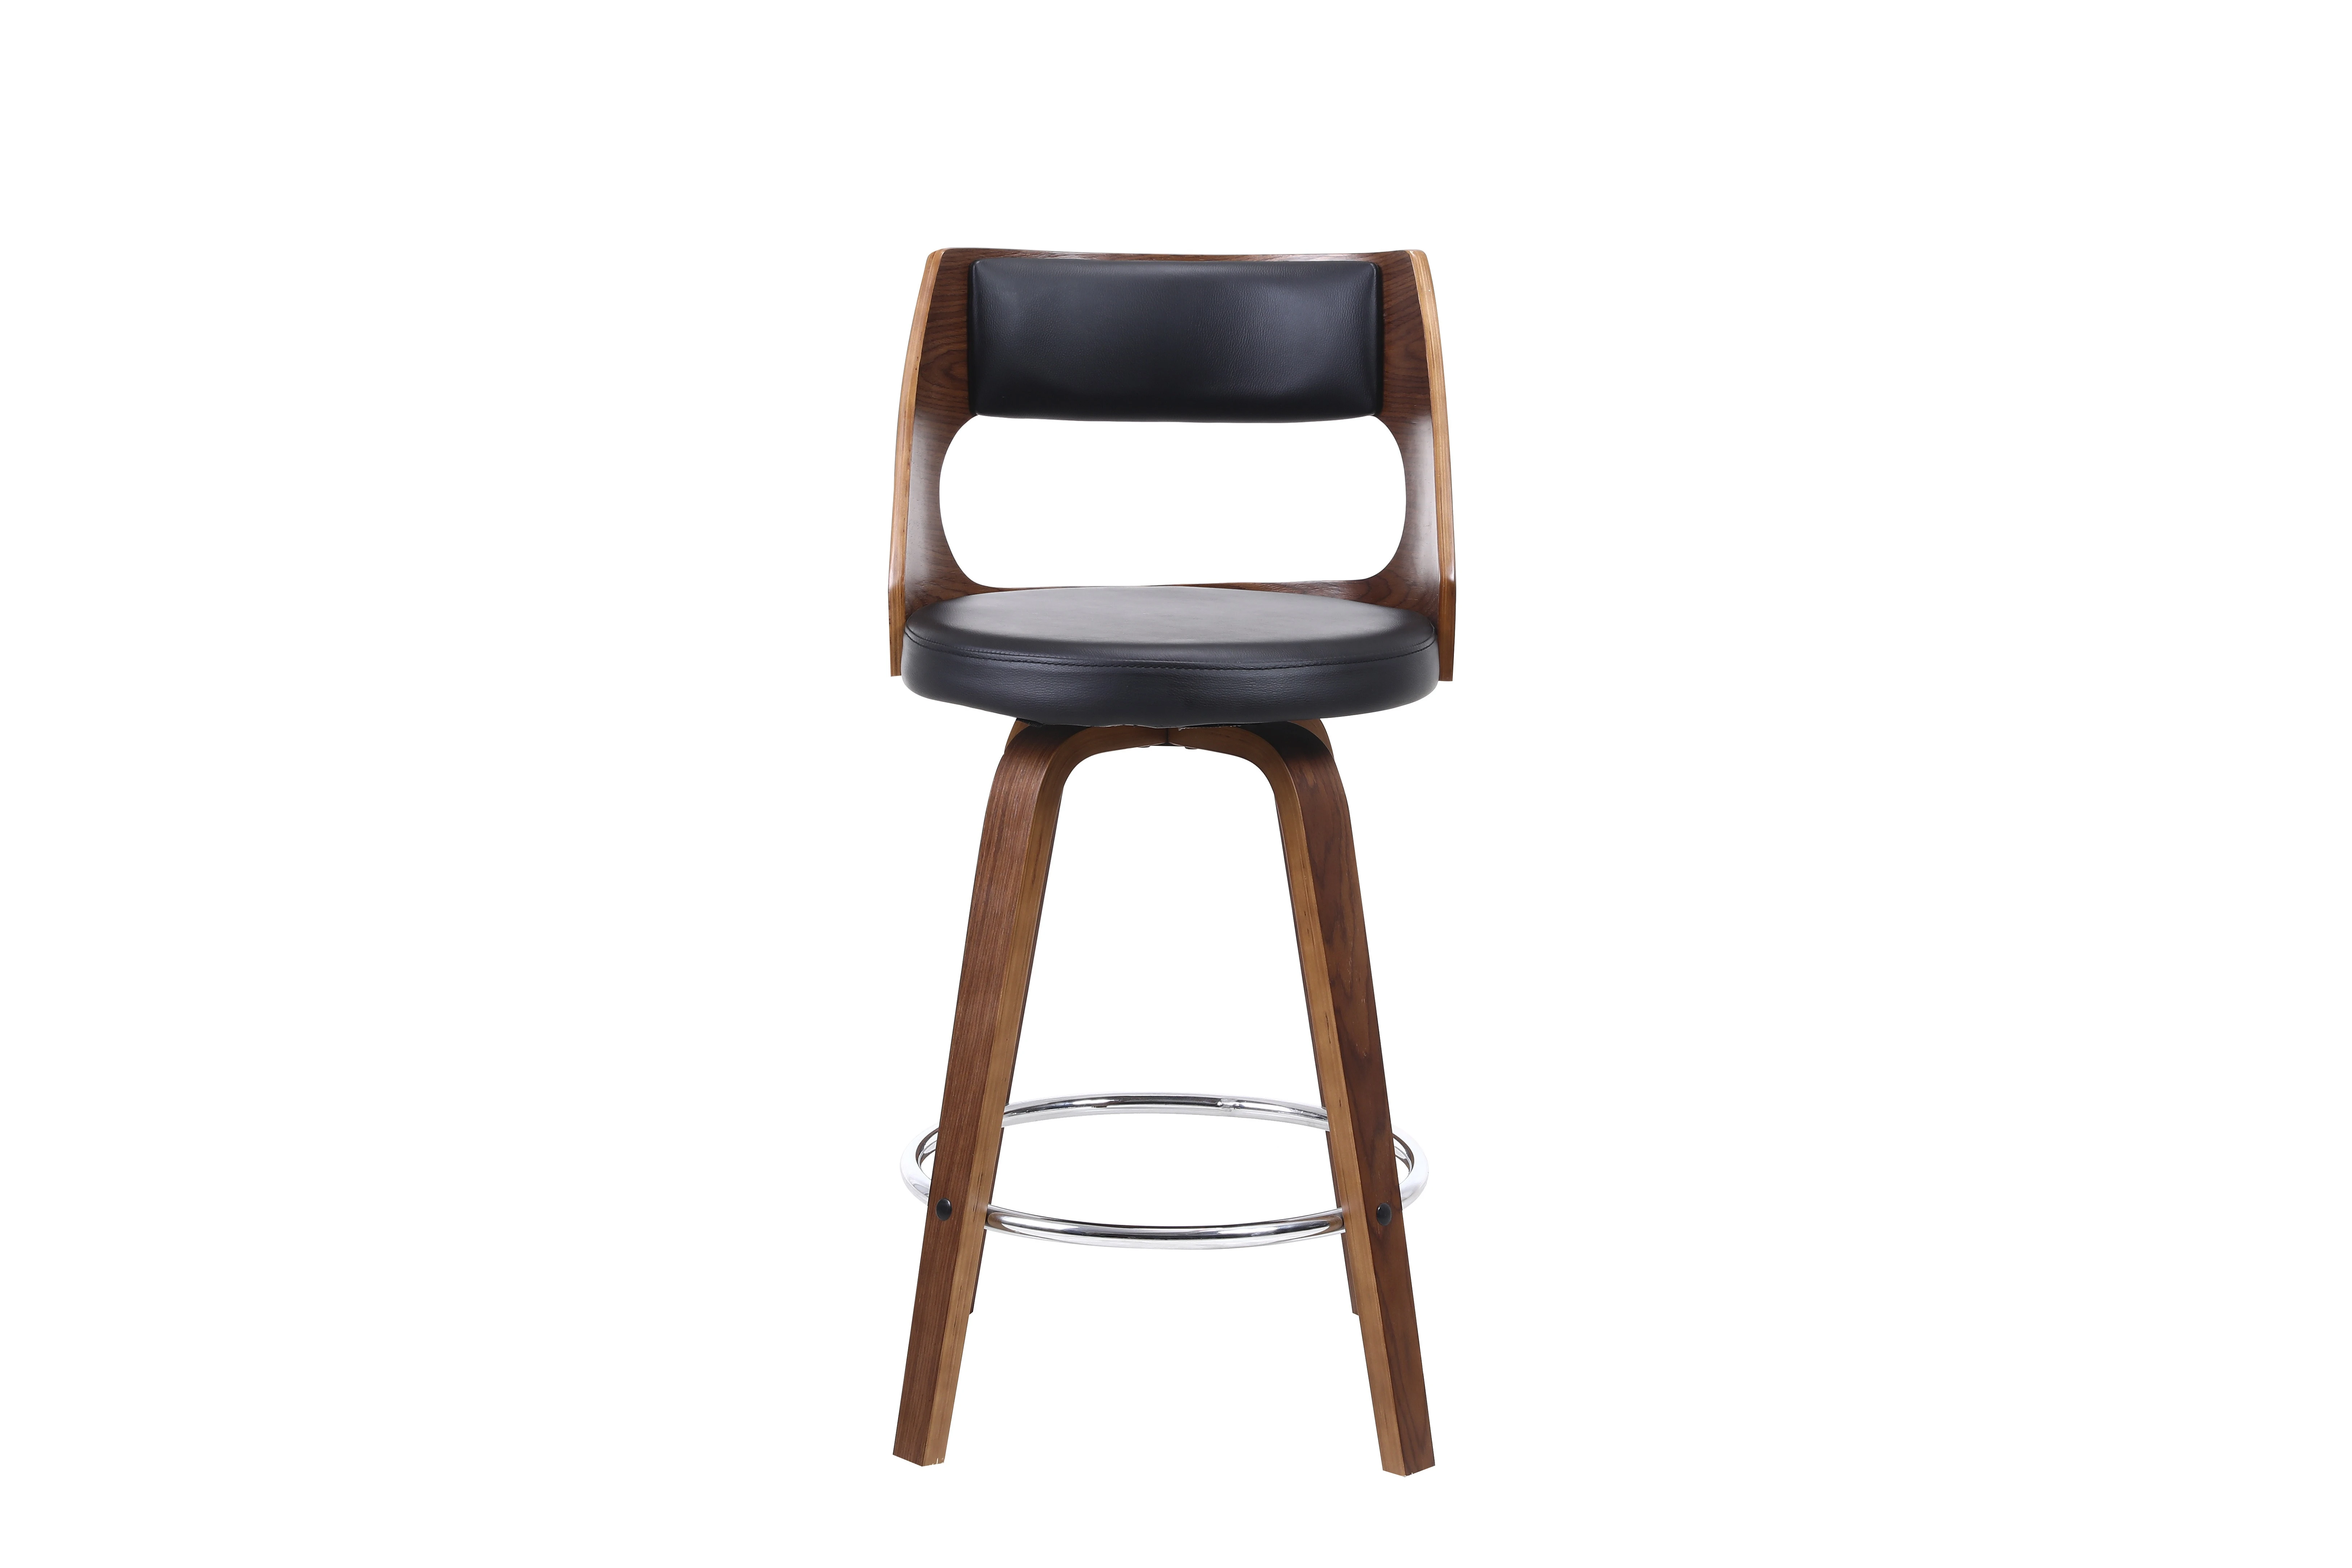 Wood bar stool freestyle classy plywood 360 degrees rotatable bar chair